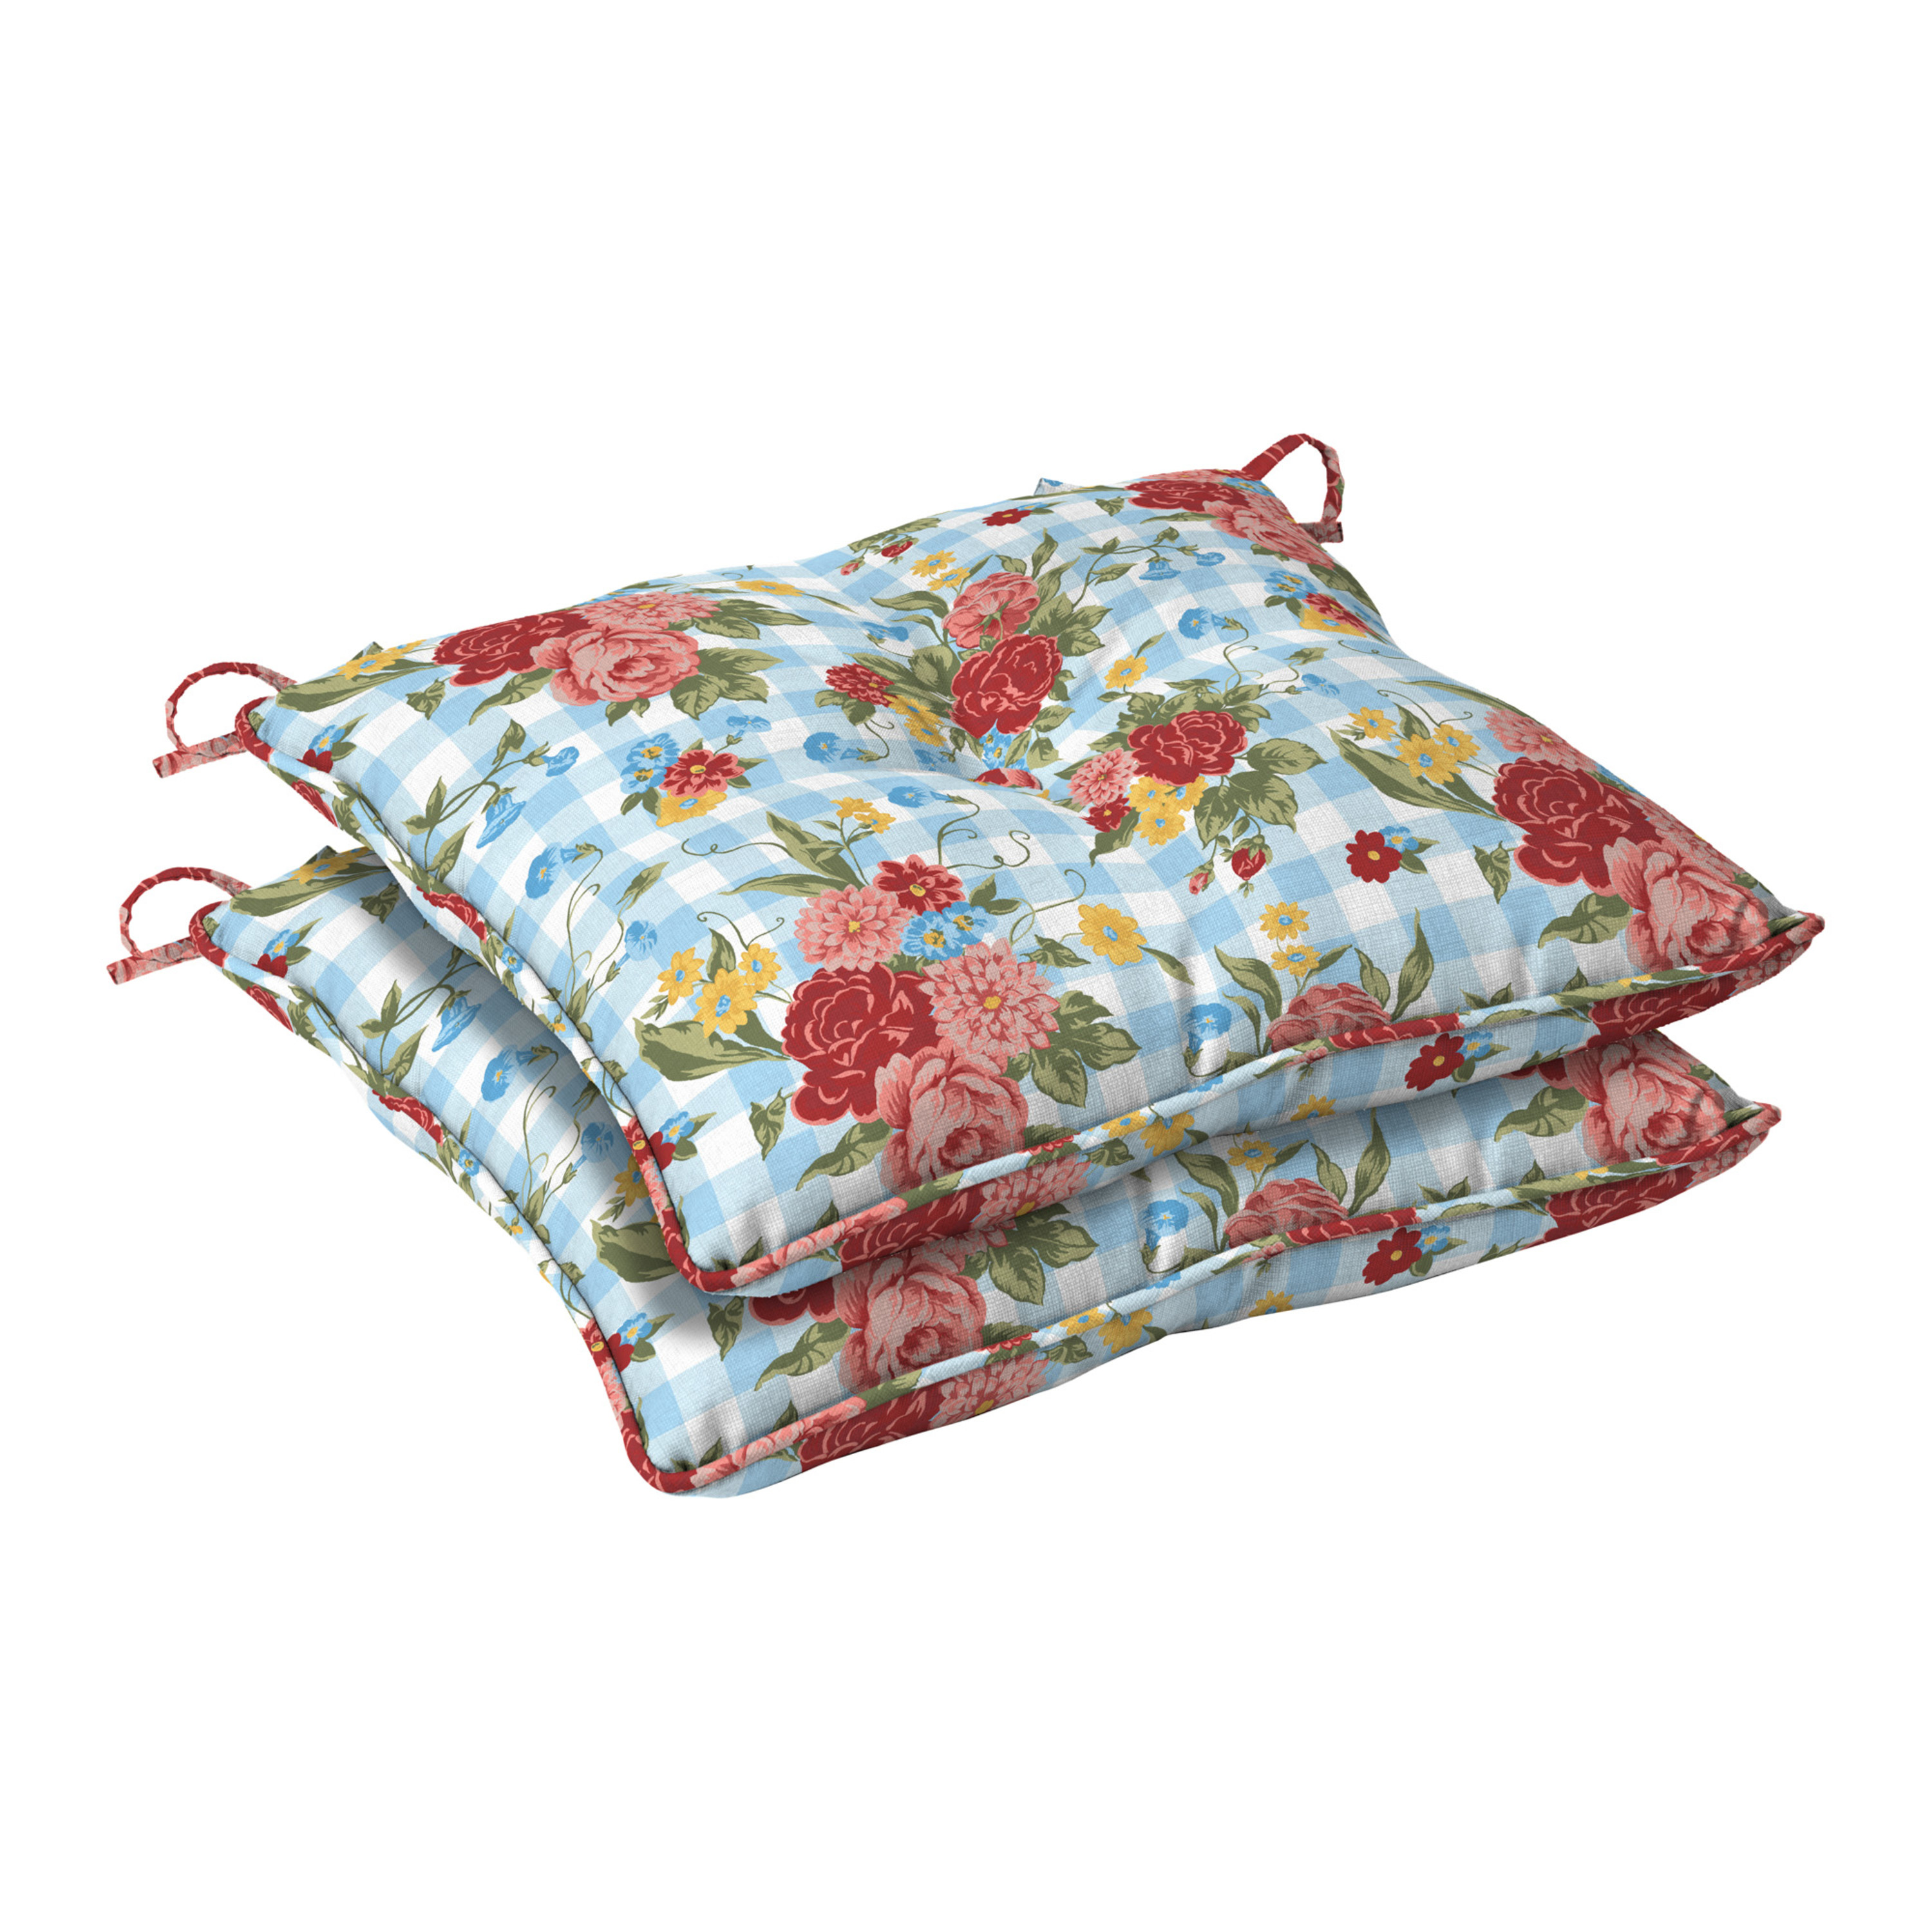 The Pioneer Woman 18" x 19" Multi-color Sweet Rose Outdoor Seat Pad, 2 Pack - image 1 of 10